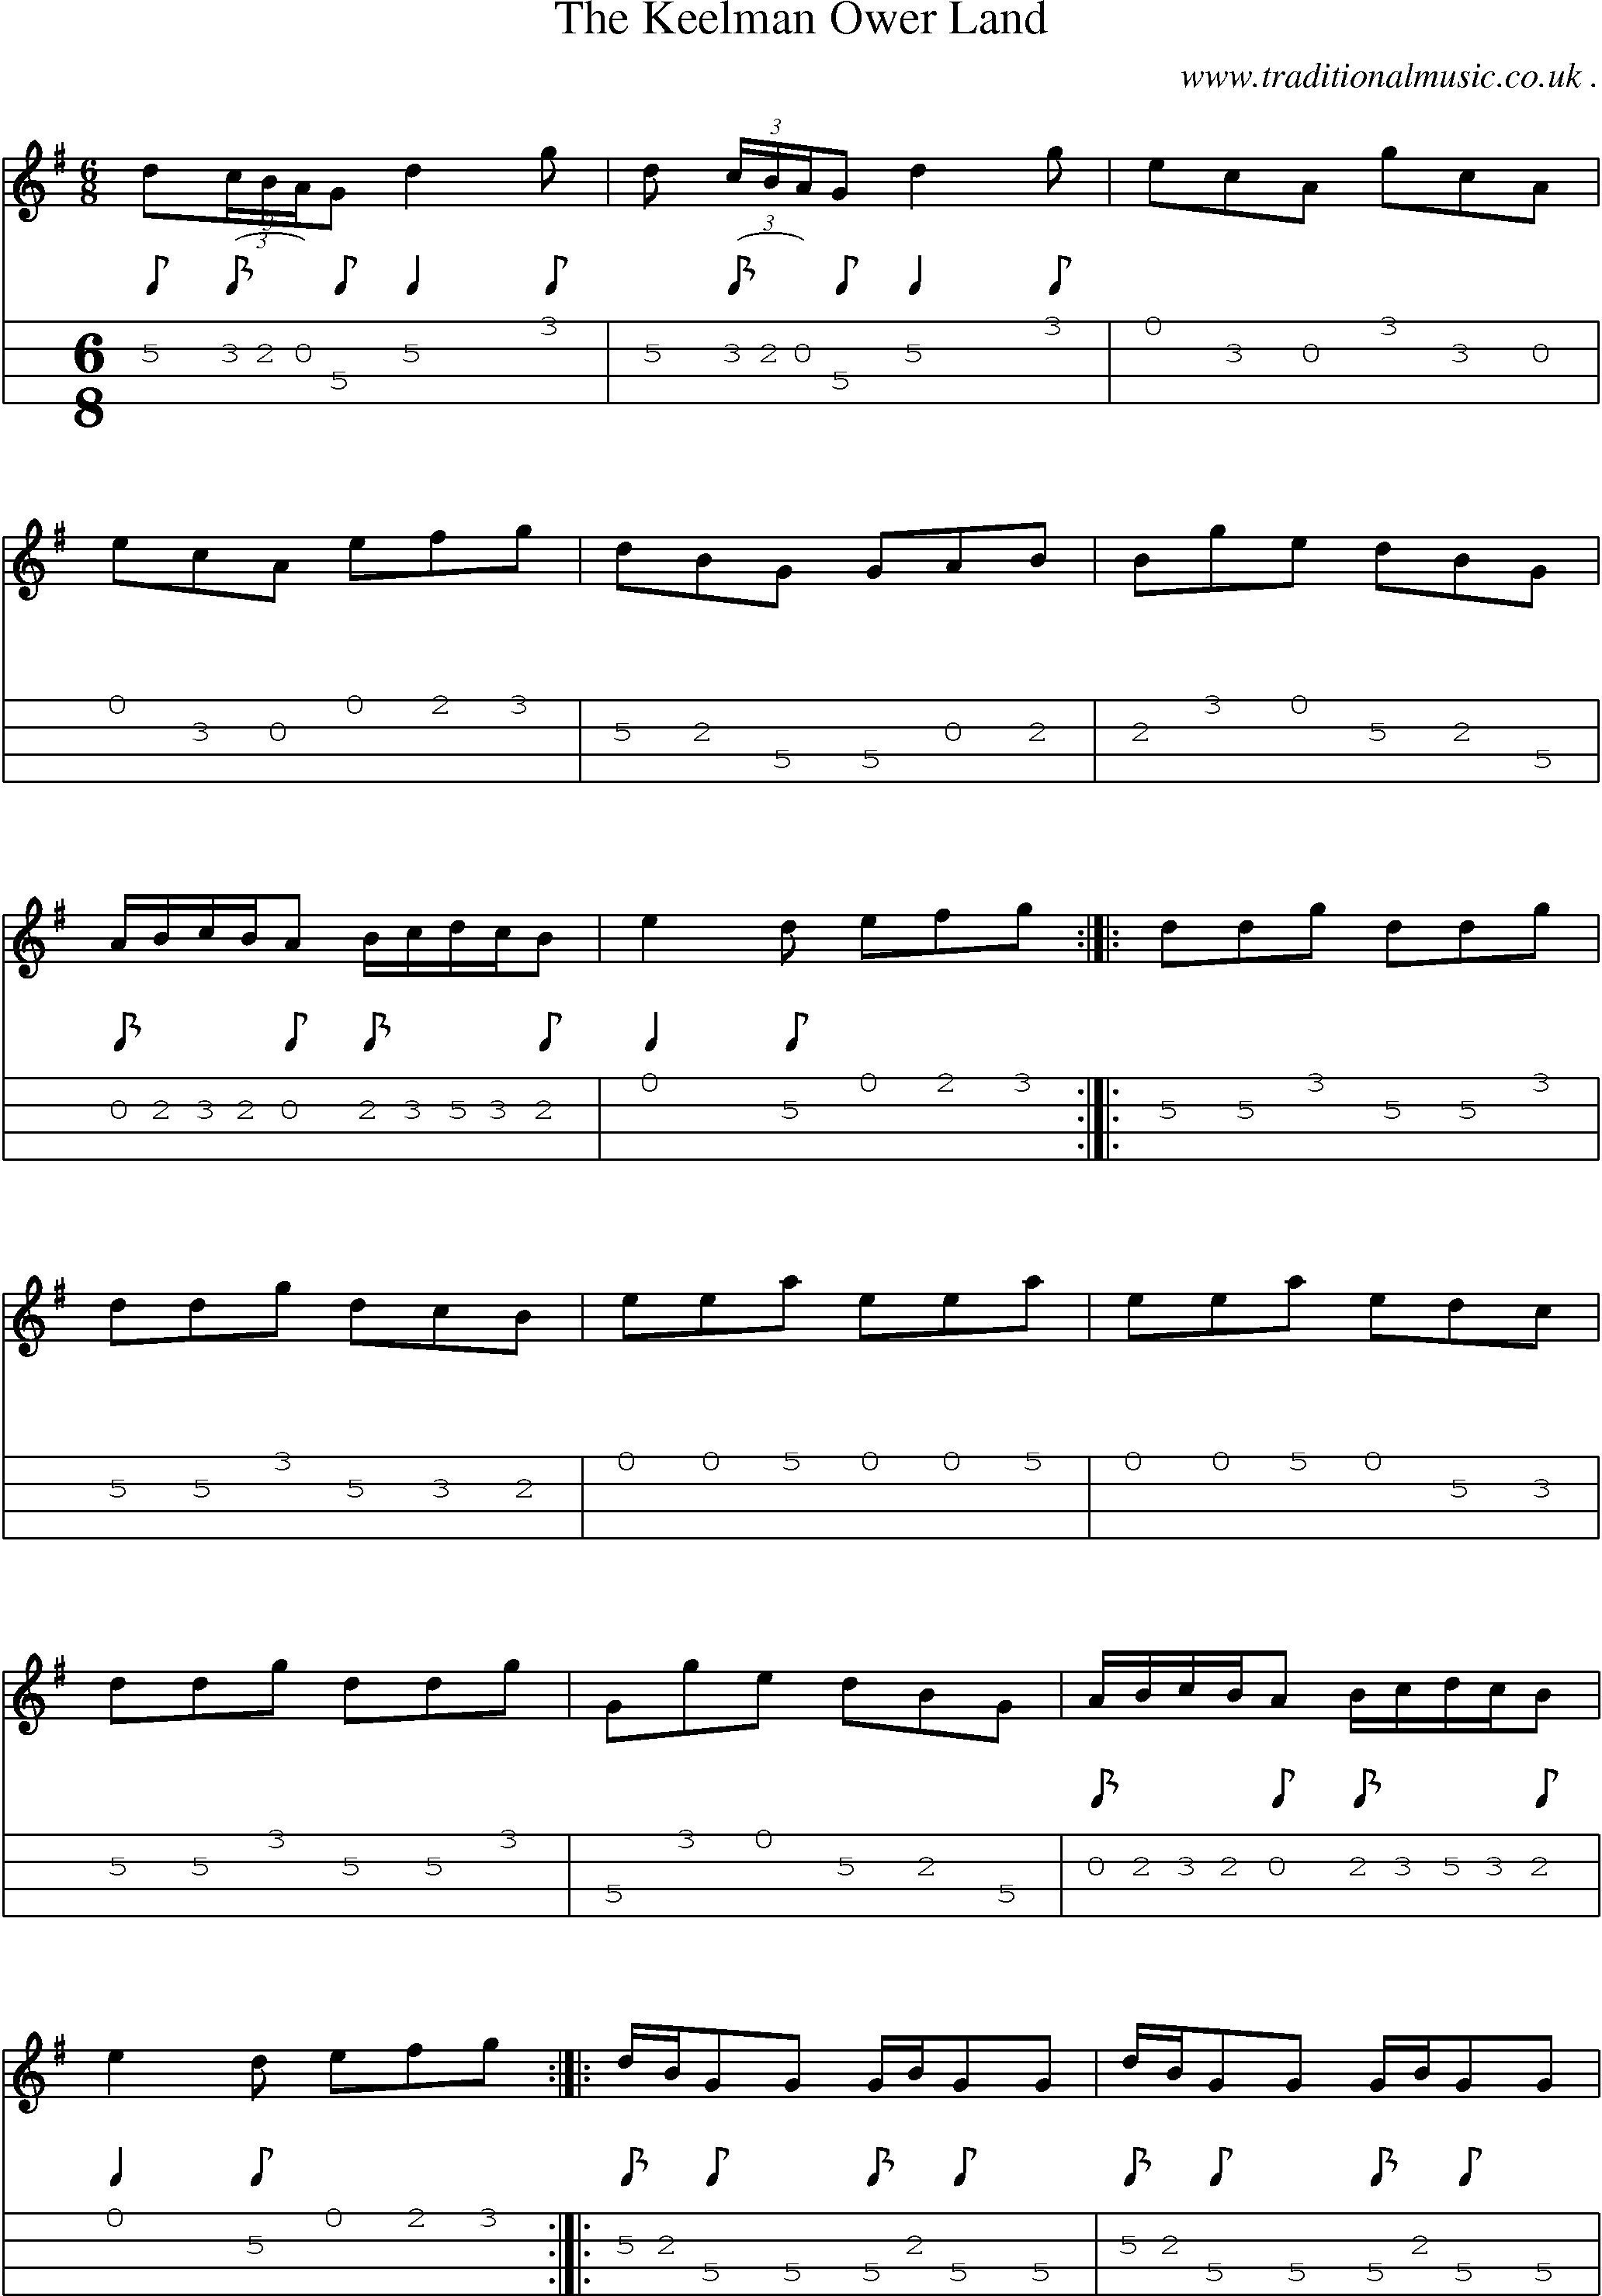 Sheet-Music and Mandolin Tabs for The Keelman Ower Land